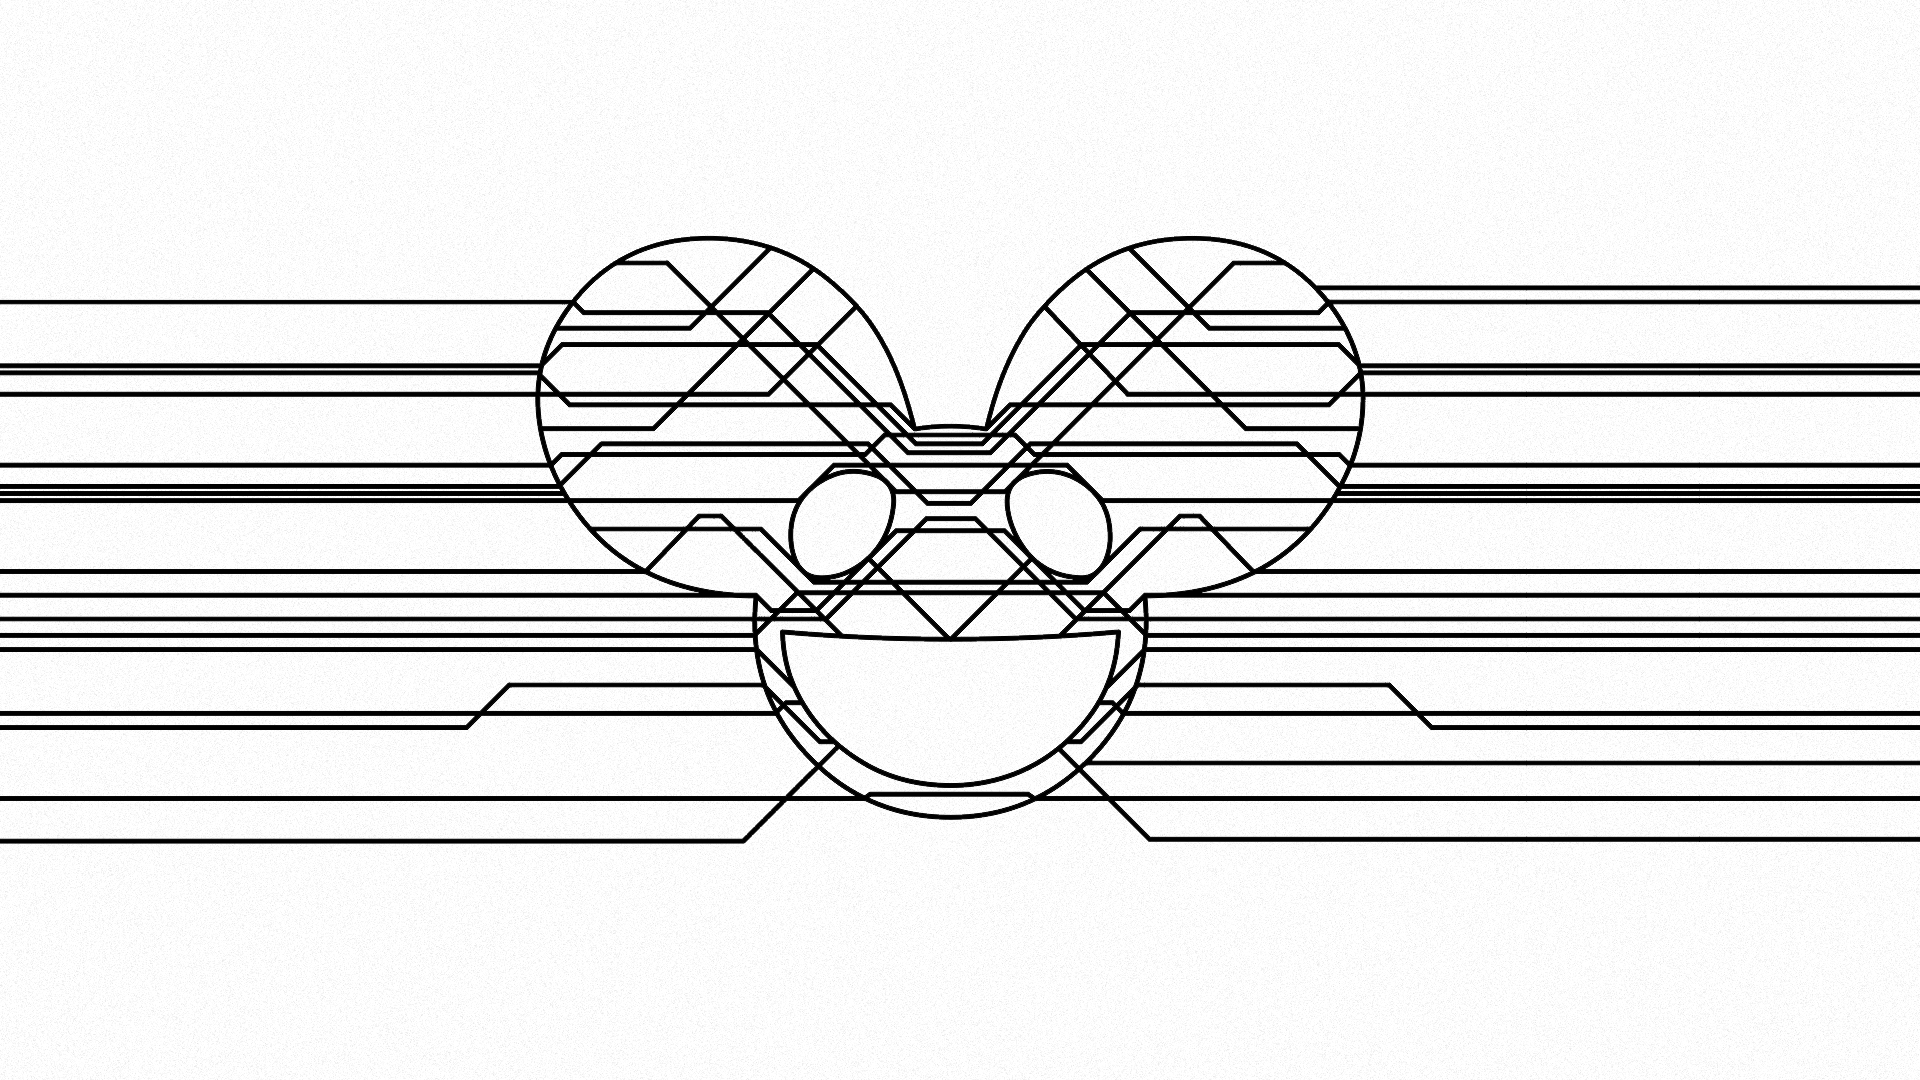 Permalink - Deadmau5 While 1 2 , HD Wallpaper & Backgrounds